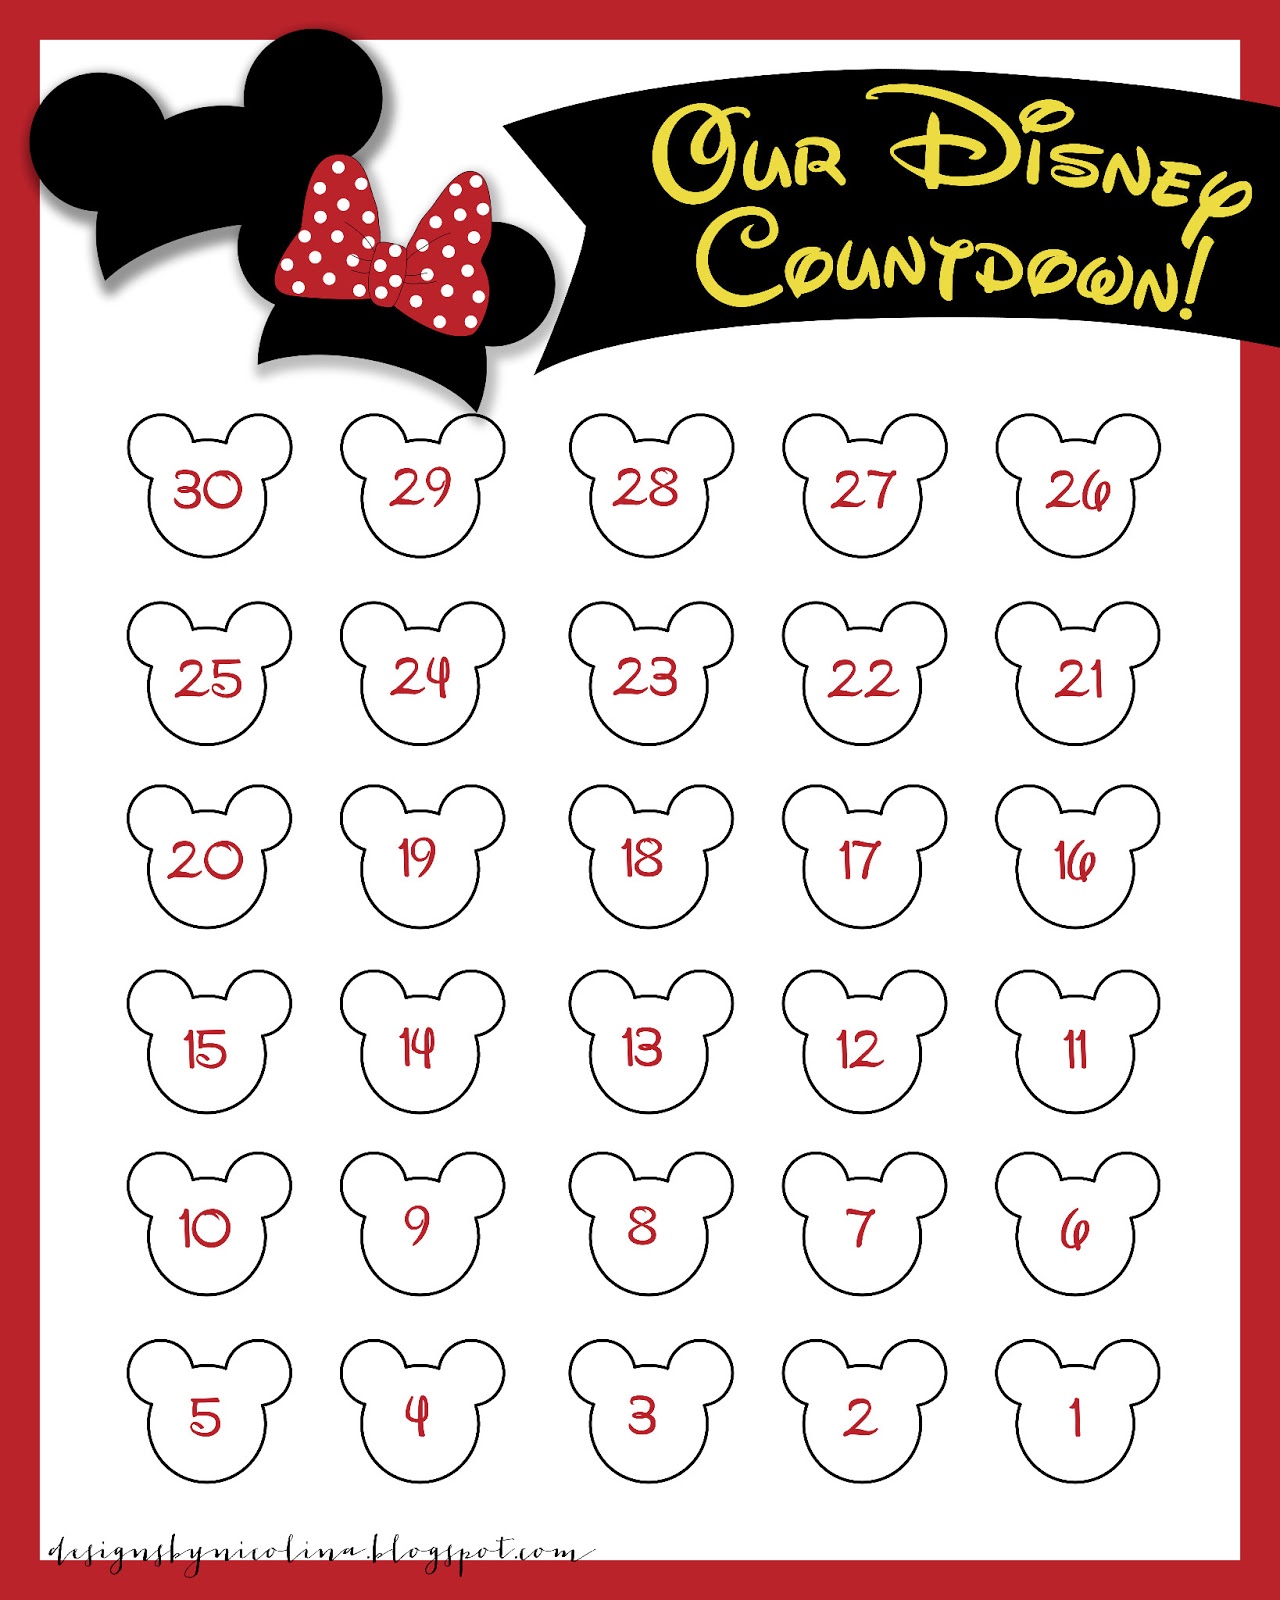 Search Results For “Countdown Calendar Printable